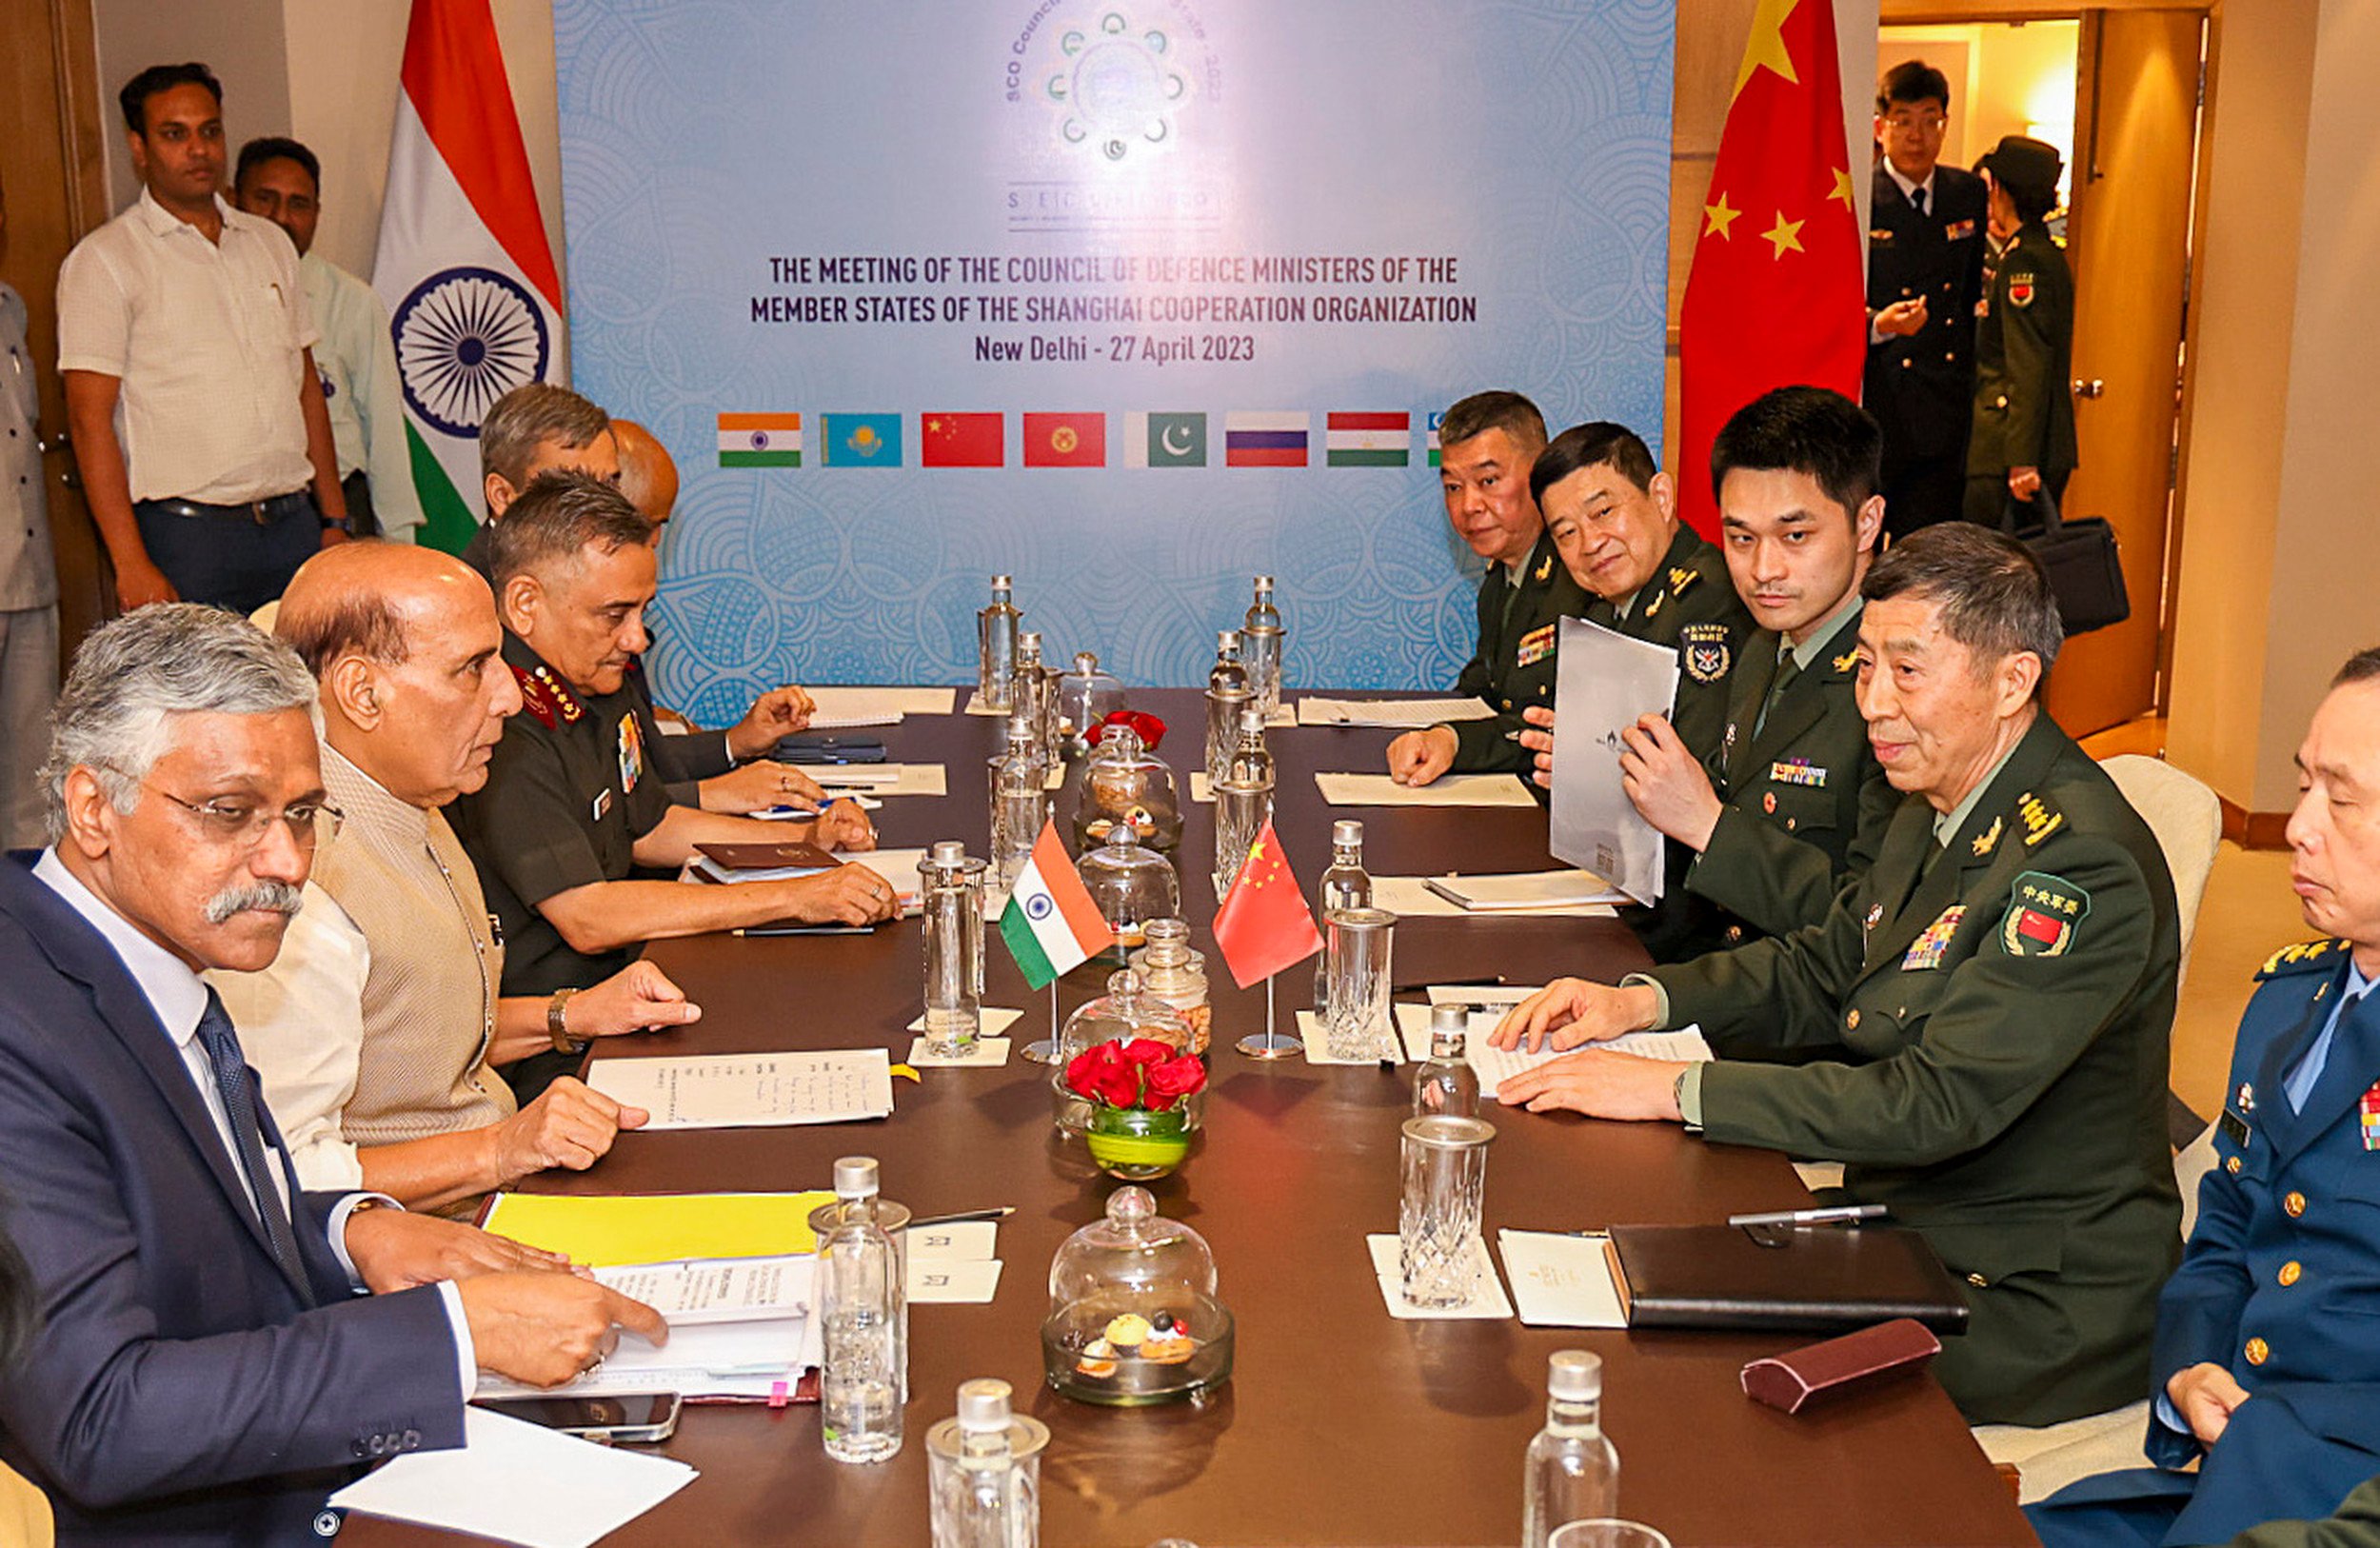 Indian defence minister Rajnath Singh and his Chinese counterpart Li Shangfu met on the sidelines of the Shanghai Cooperation Organisation defence minister’s meeting in New Delhi. Photo: EPA-EFE/Indian Ministry of Defence